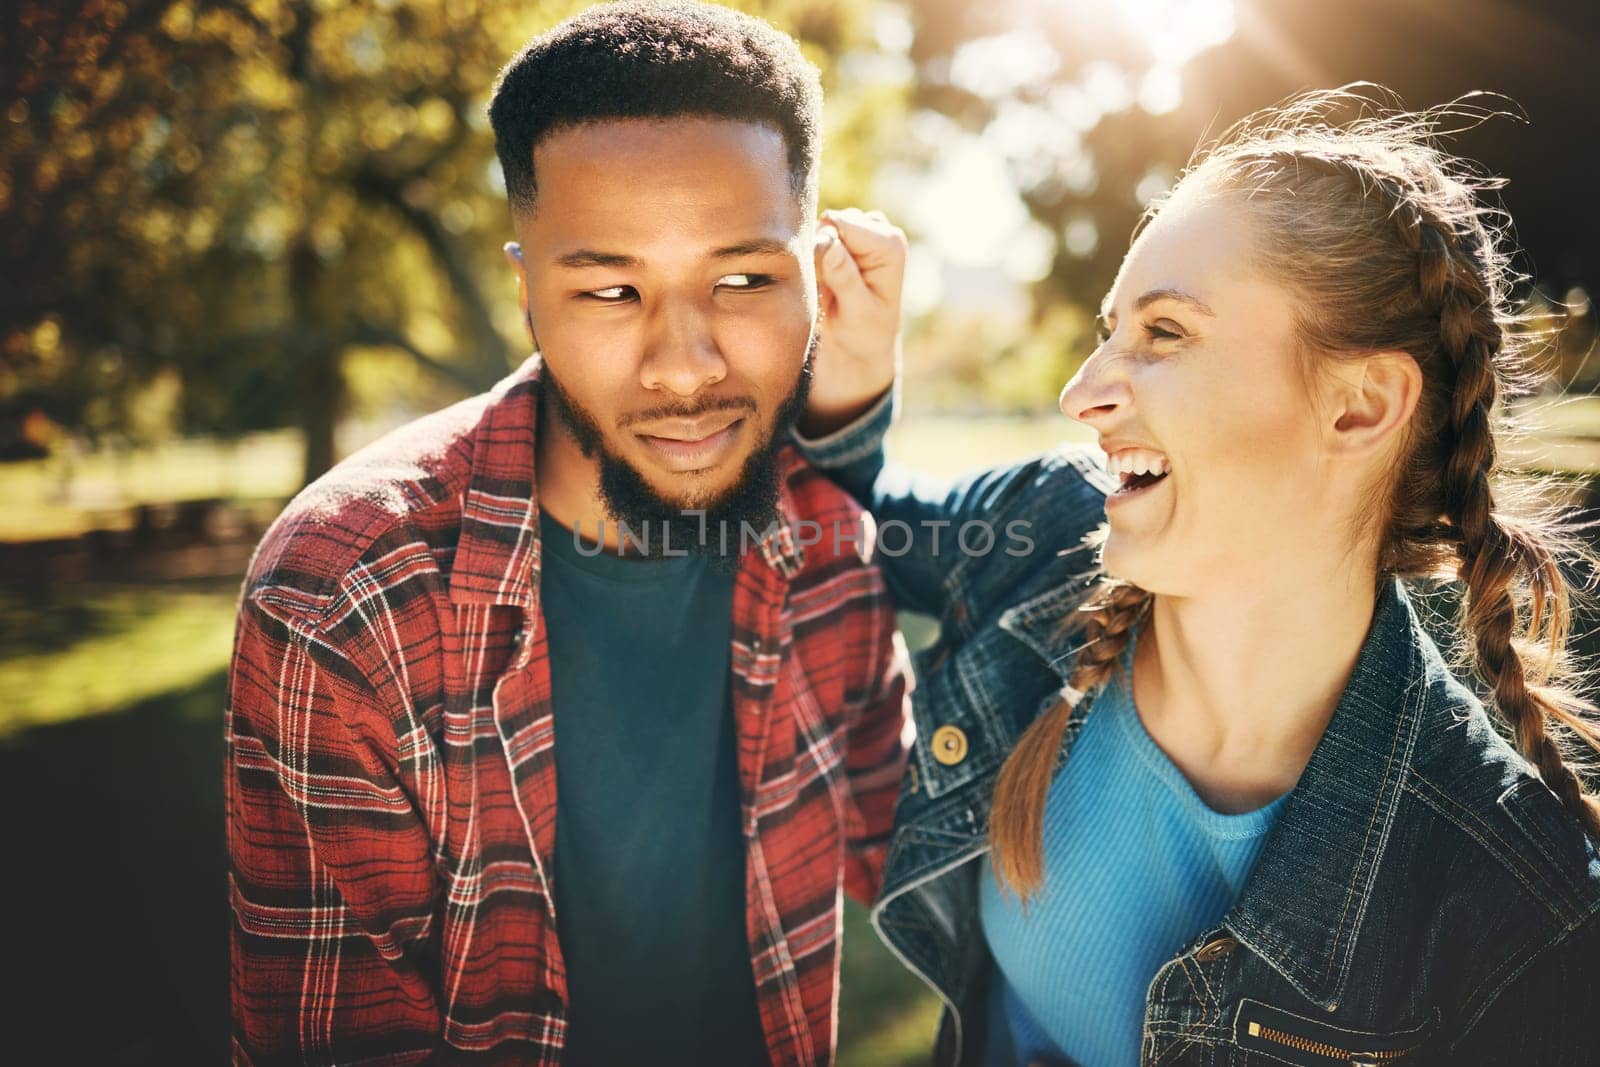 Interracial couple, laughing and smile in nature for playful love, bonding and funny relationship. Happy woman holding man ear with laugh for fun loving care, affection or playing in a park outdoors.